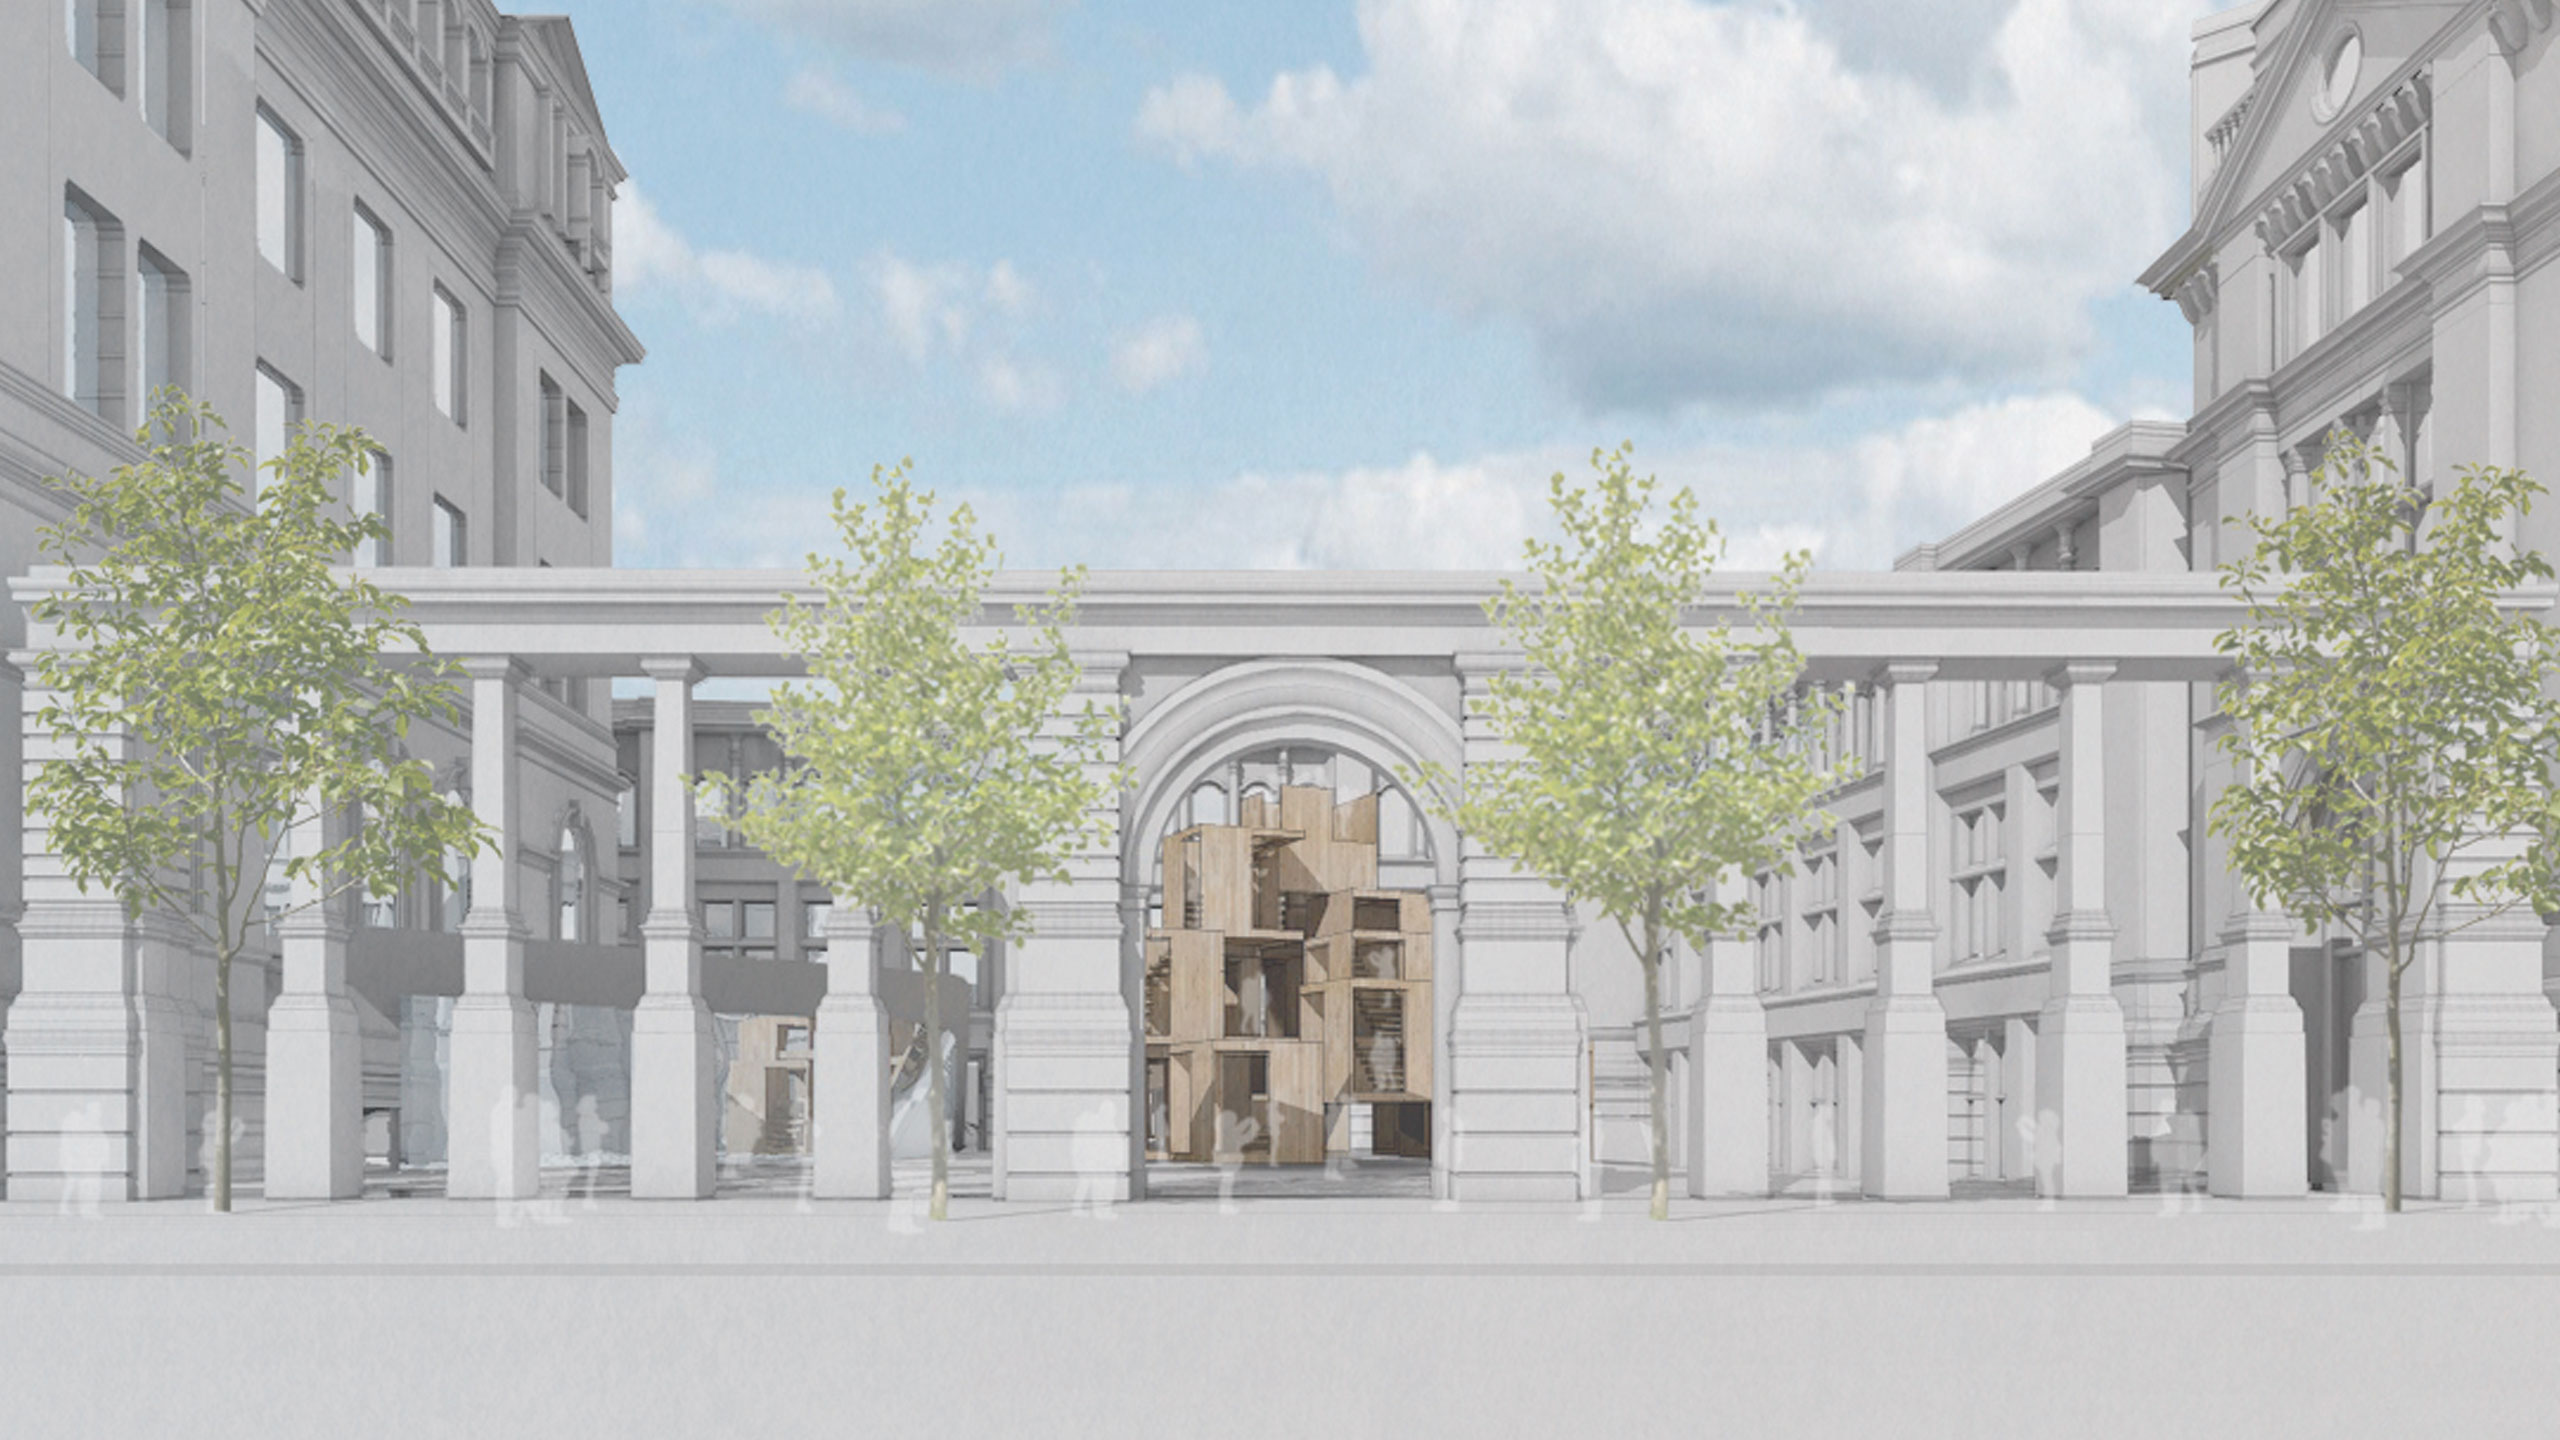 MultiPly will be shown in the newly remodelled Sackler Courtyard at the V&A Museum.